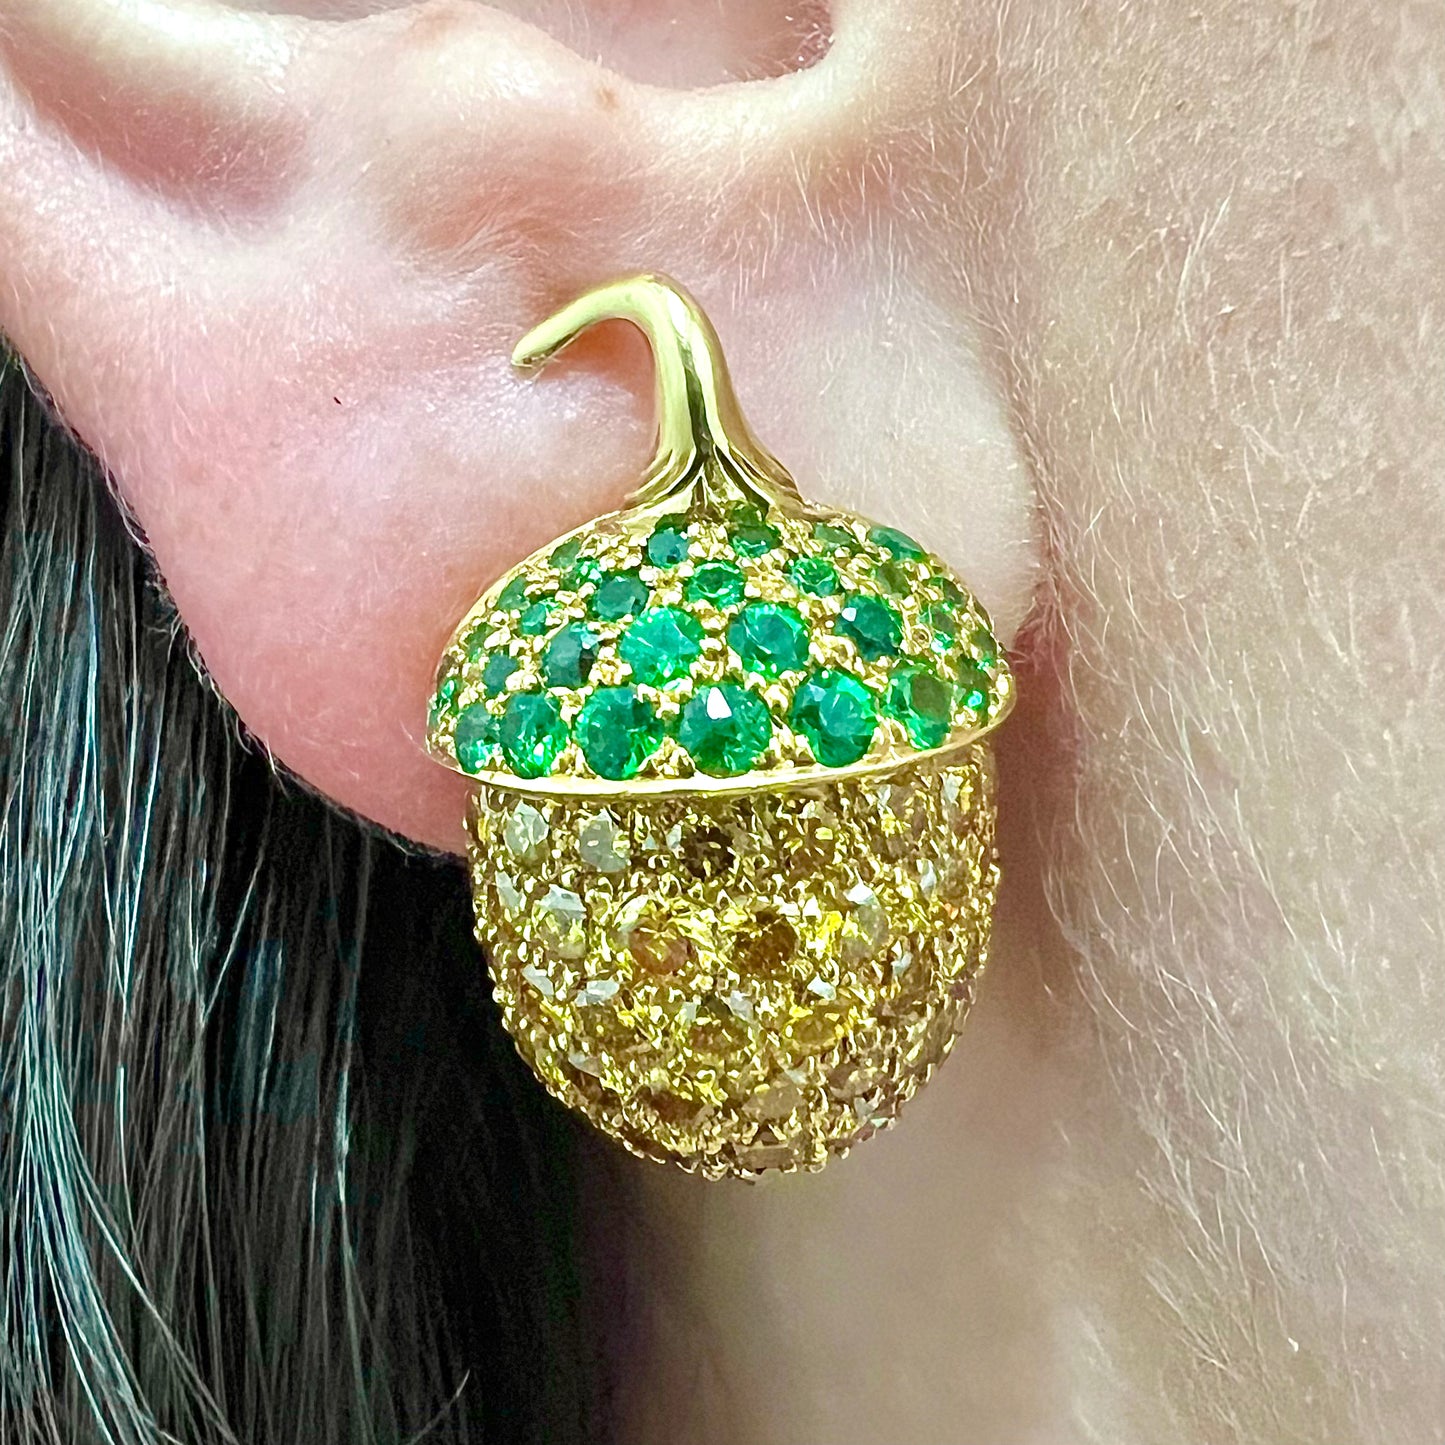 Important Handcrafted 18 Karat Yellow Gold 4.75 Carats Yellow Diamond & Tsavorite Garnet Earrings By Carvin French